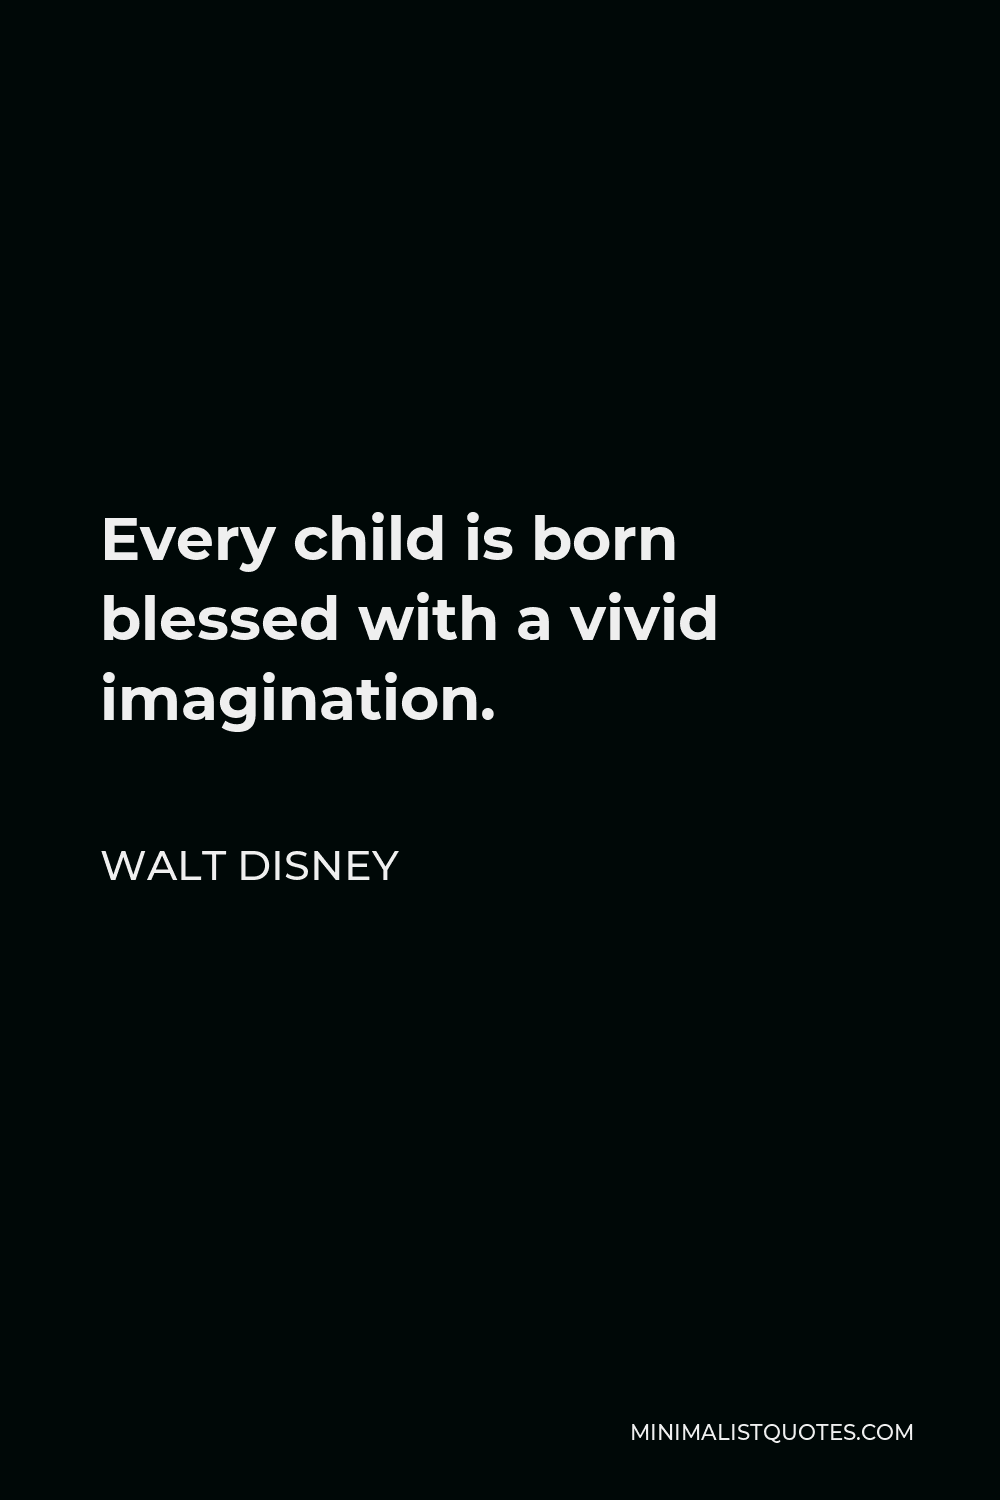 Walt Disney Quote - Every child is born blessed with a vivid imagination.